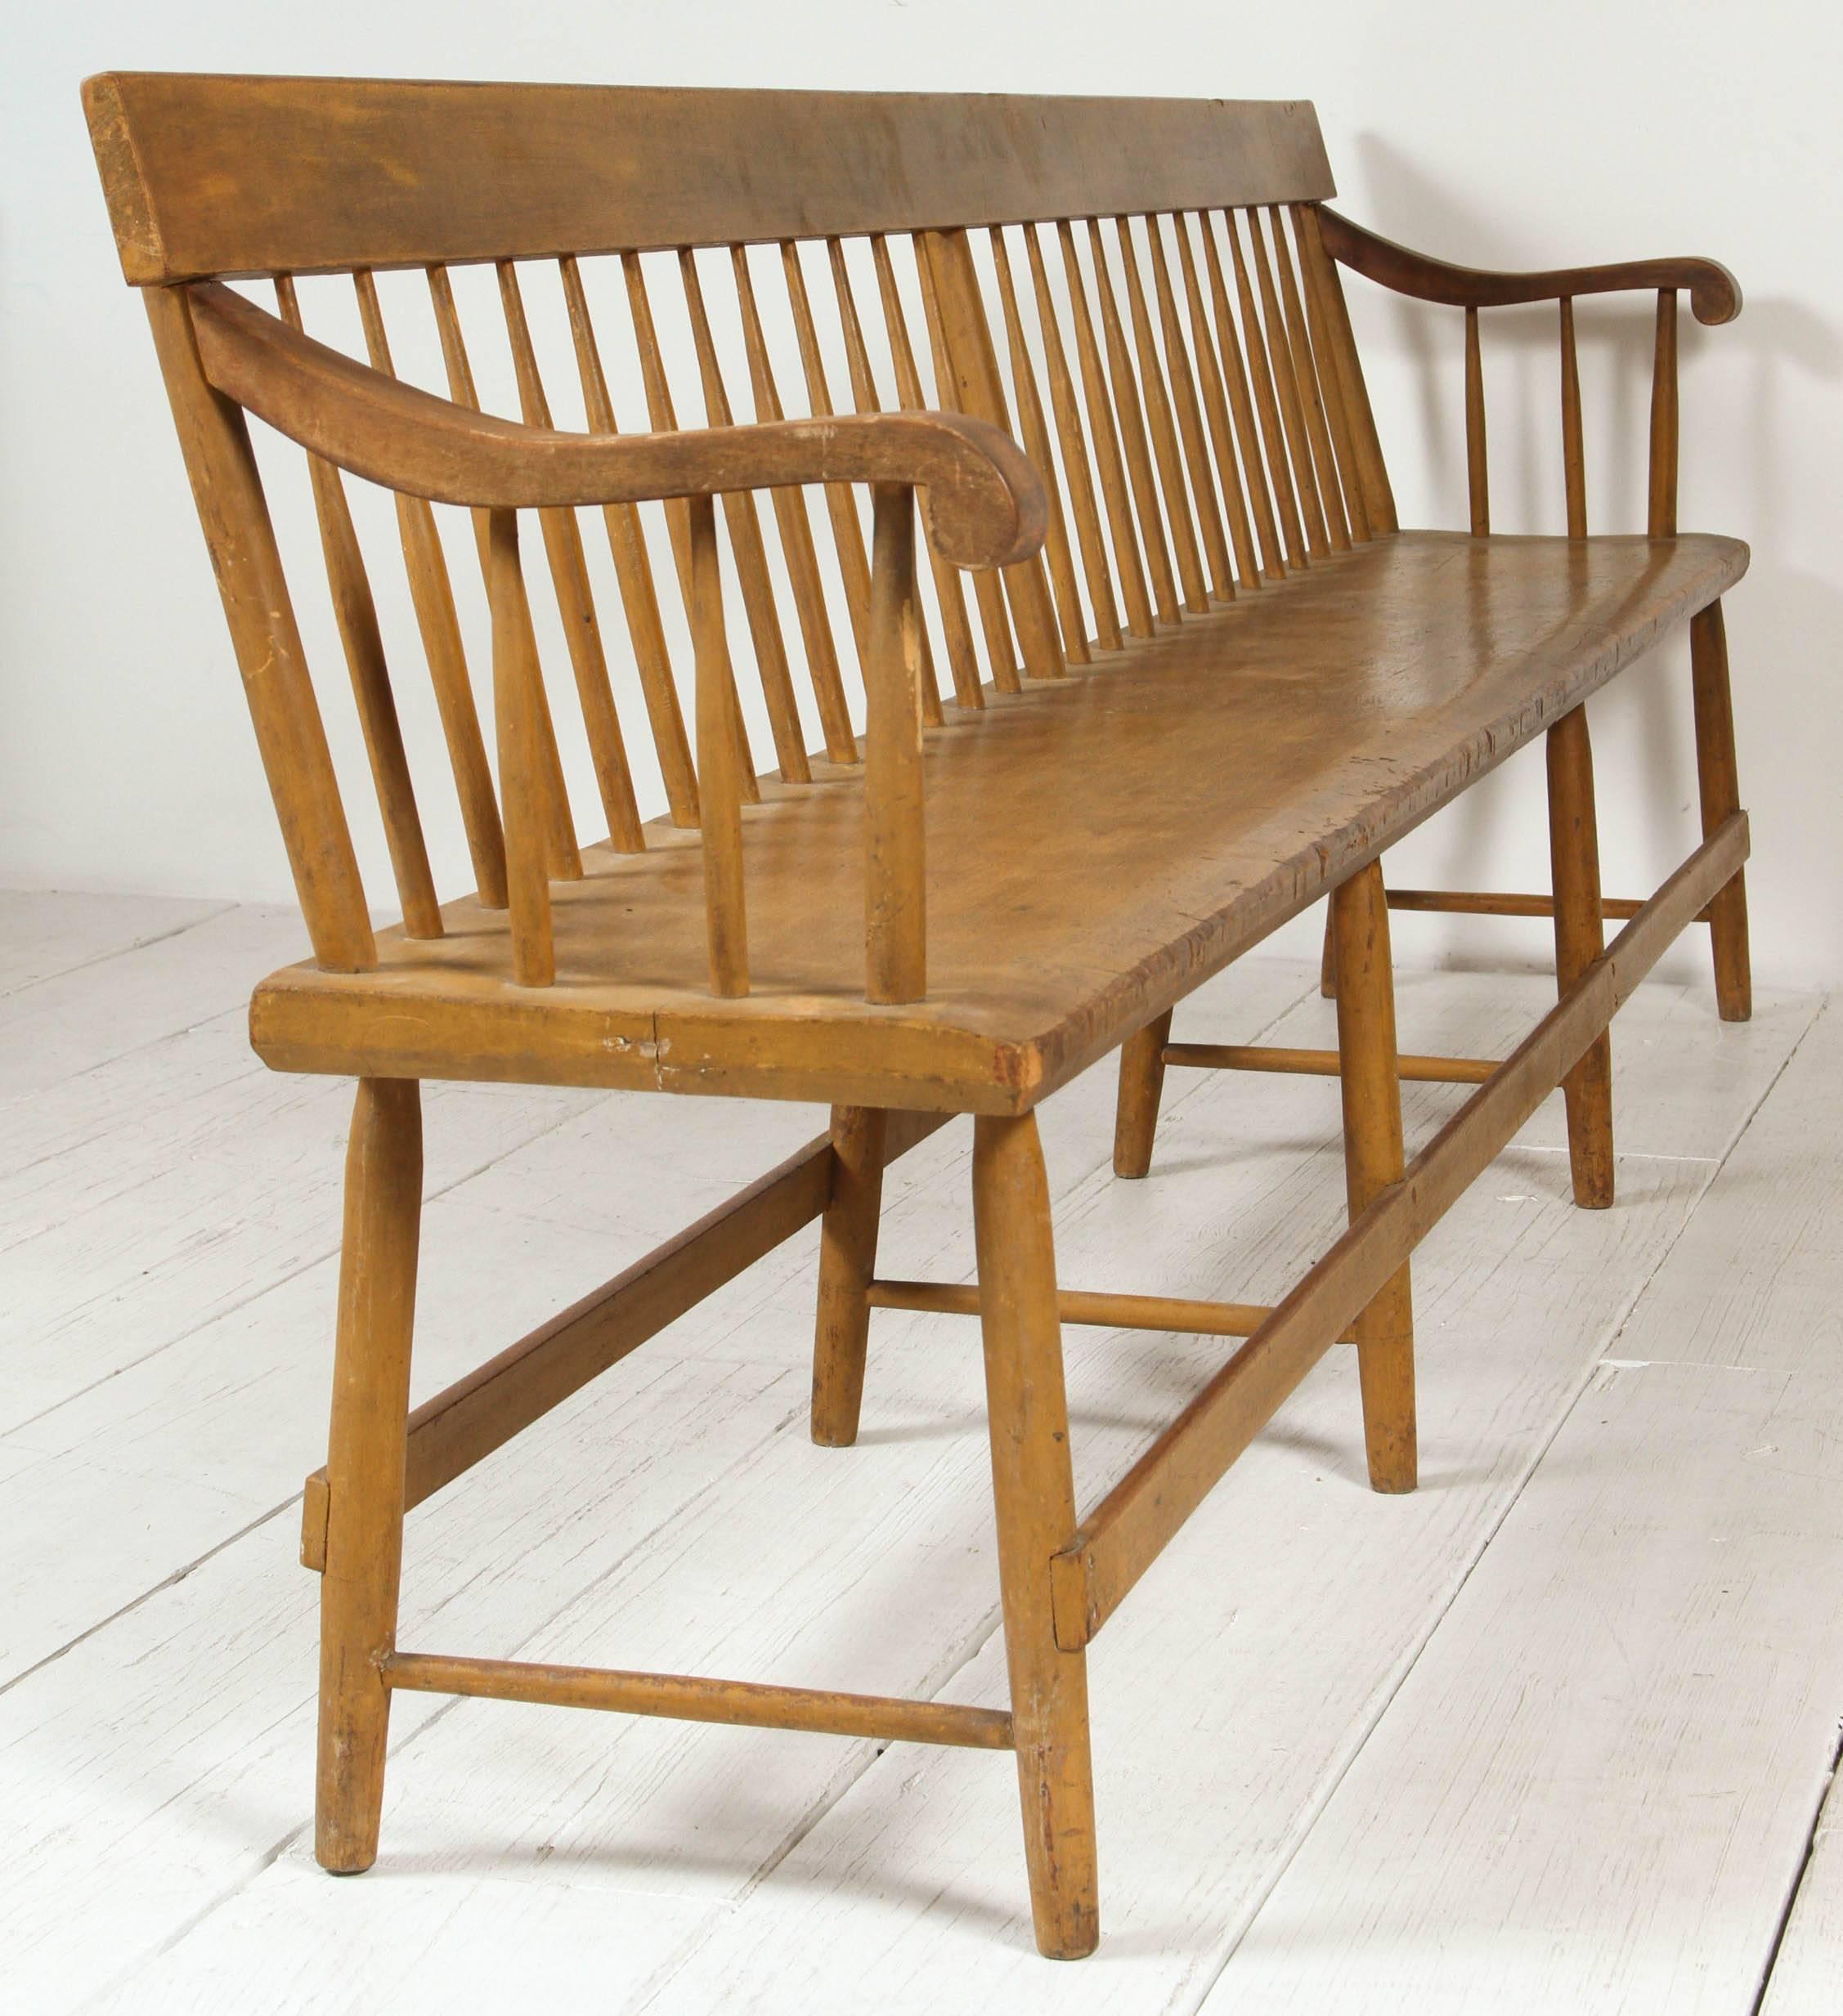 American Long Spindle Back Deacon Bench